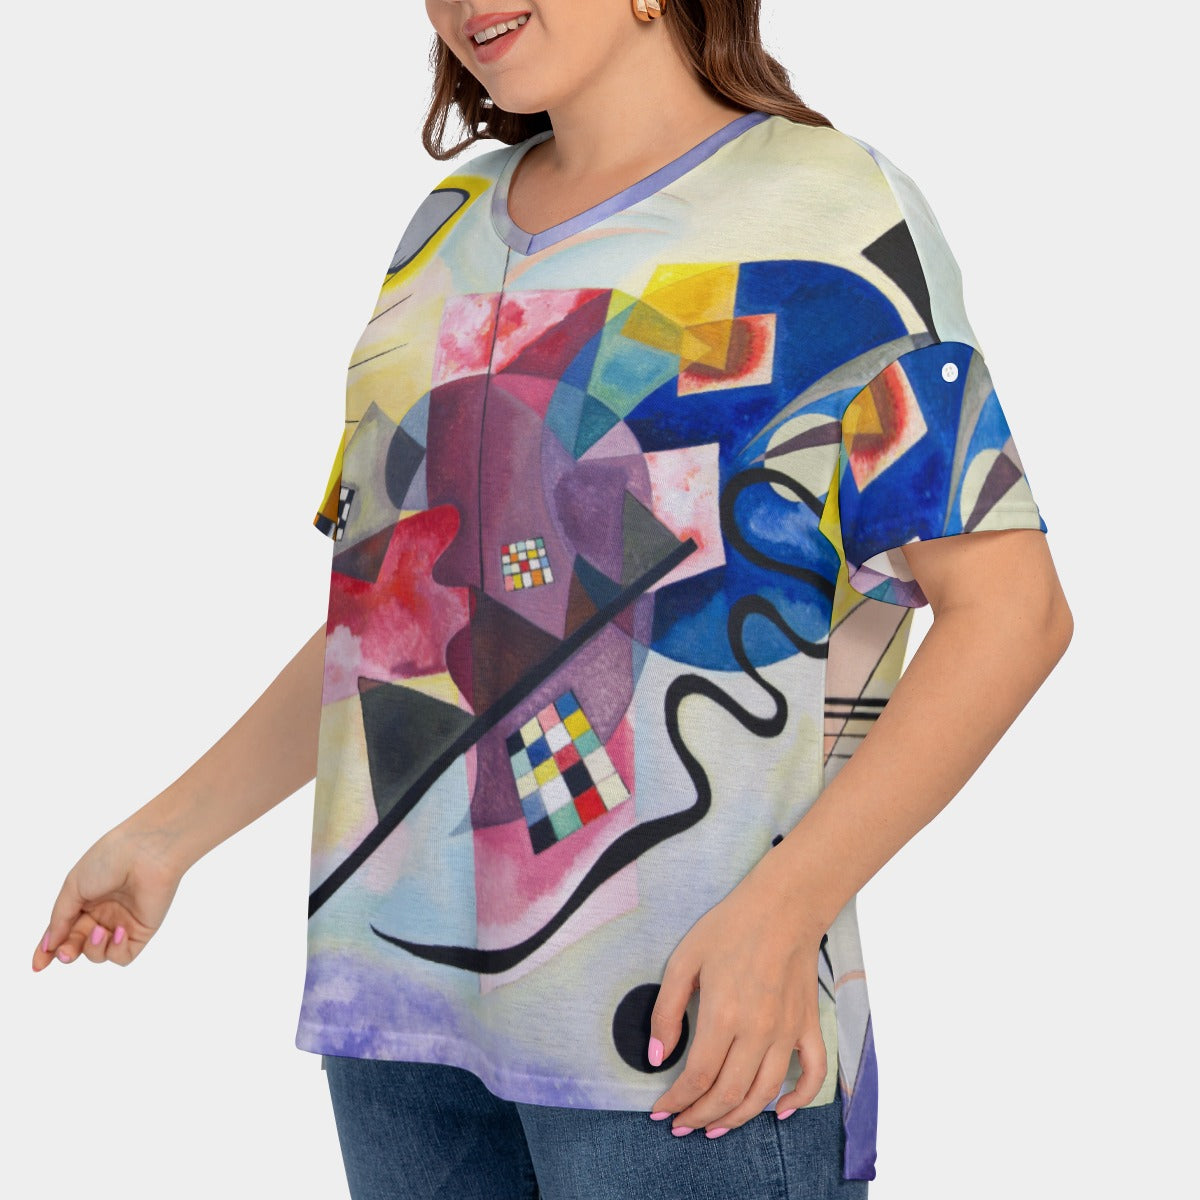 Eye-catching tee inspired by Wassily Kandinsky's iconic artwork